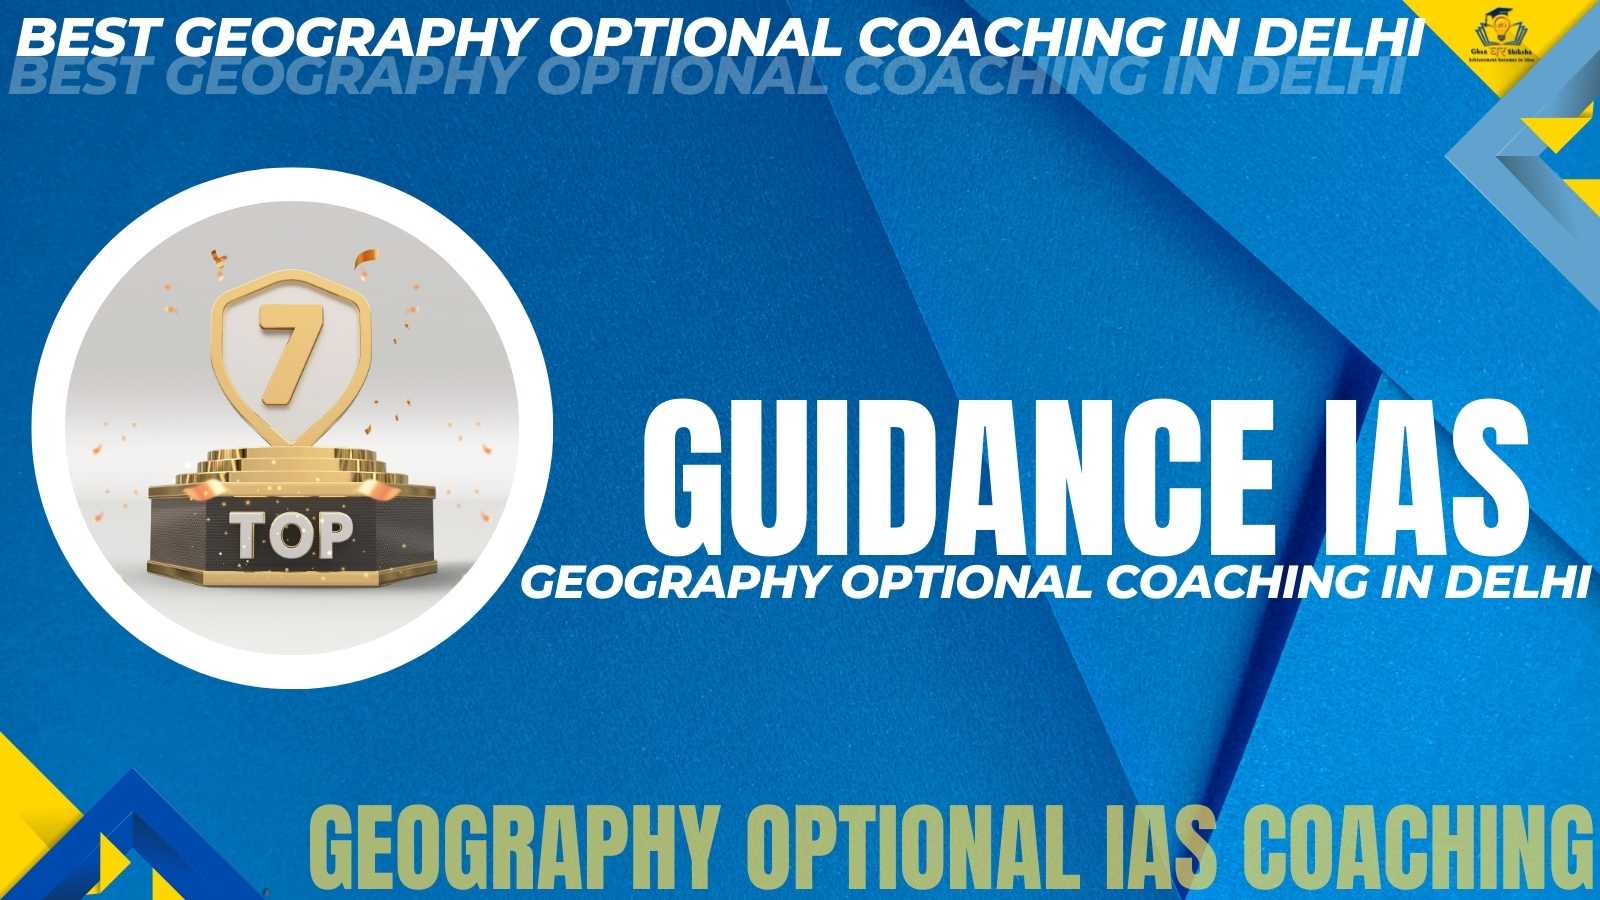 Best Geography Optional Coaching Institute In Delhi